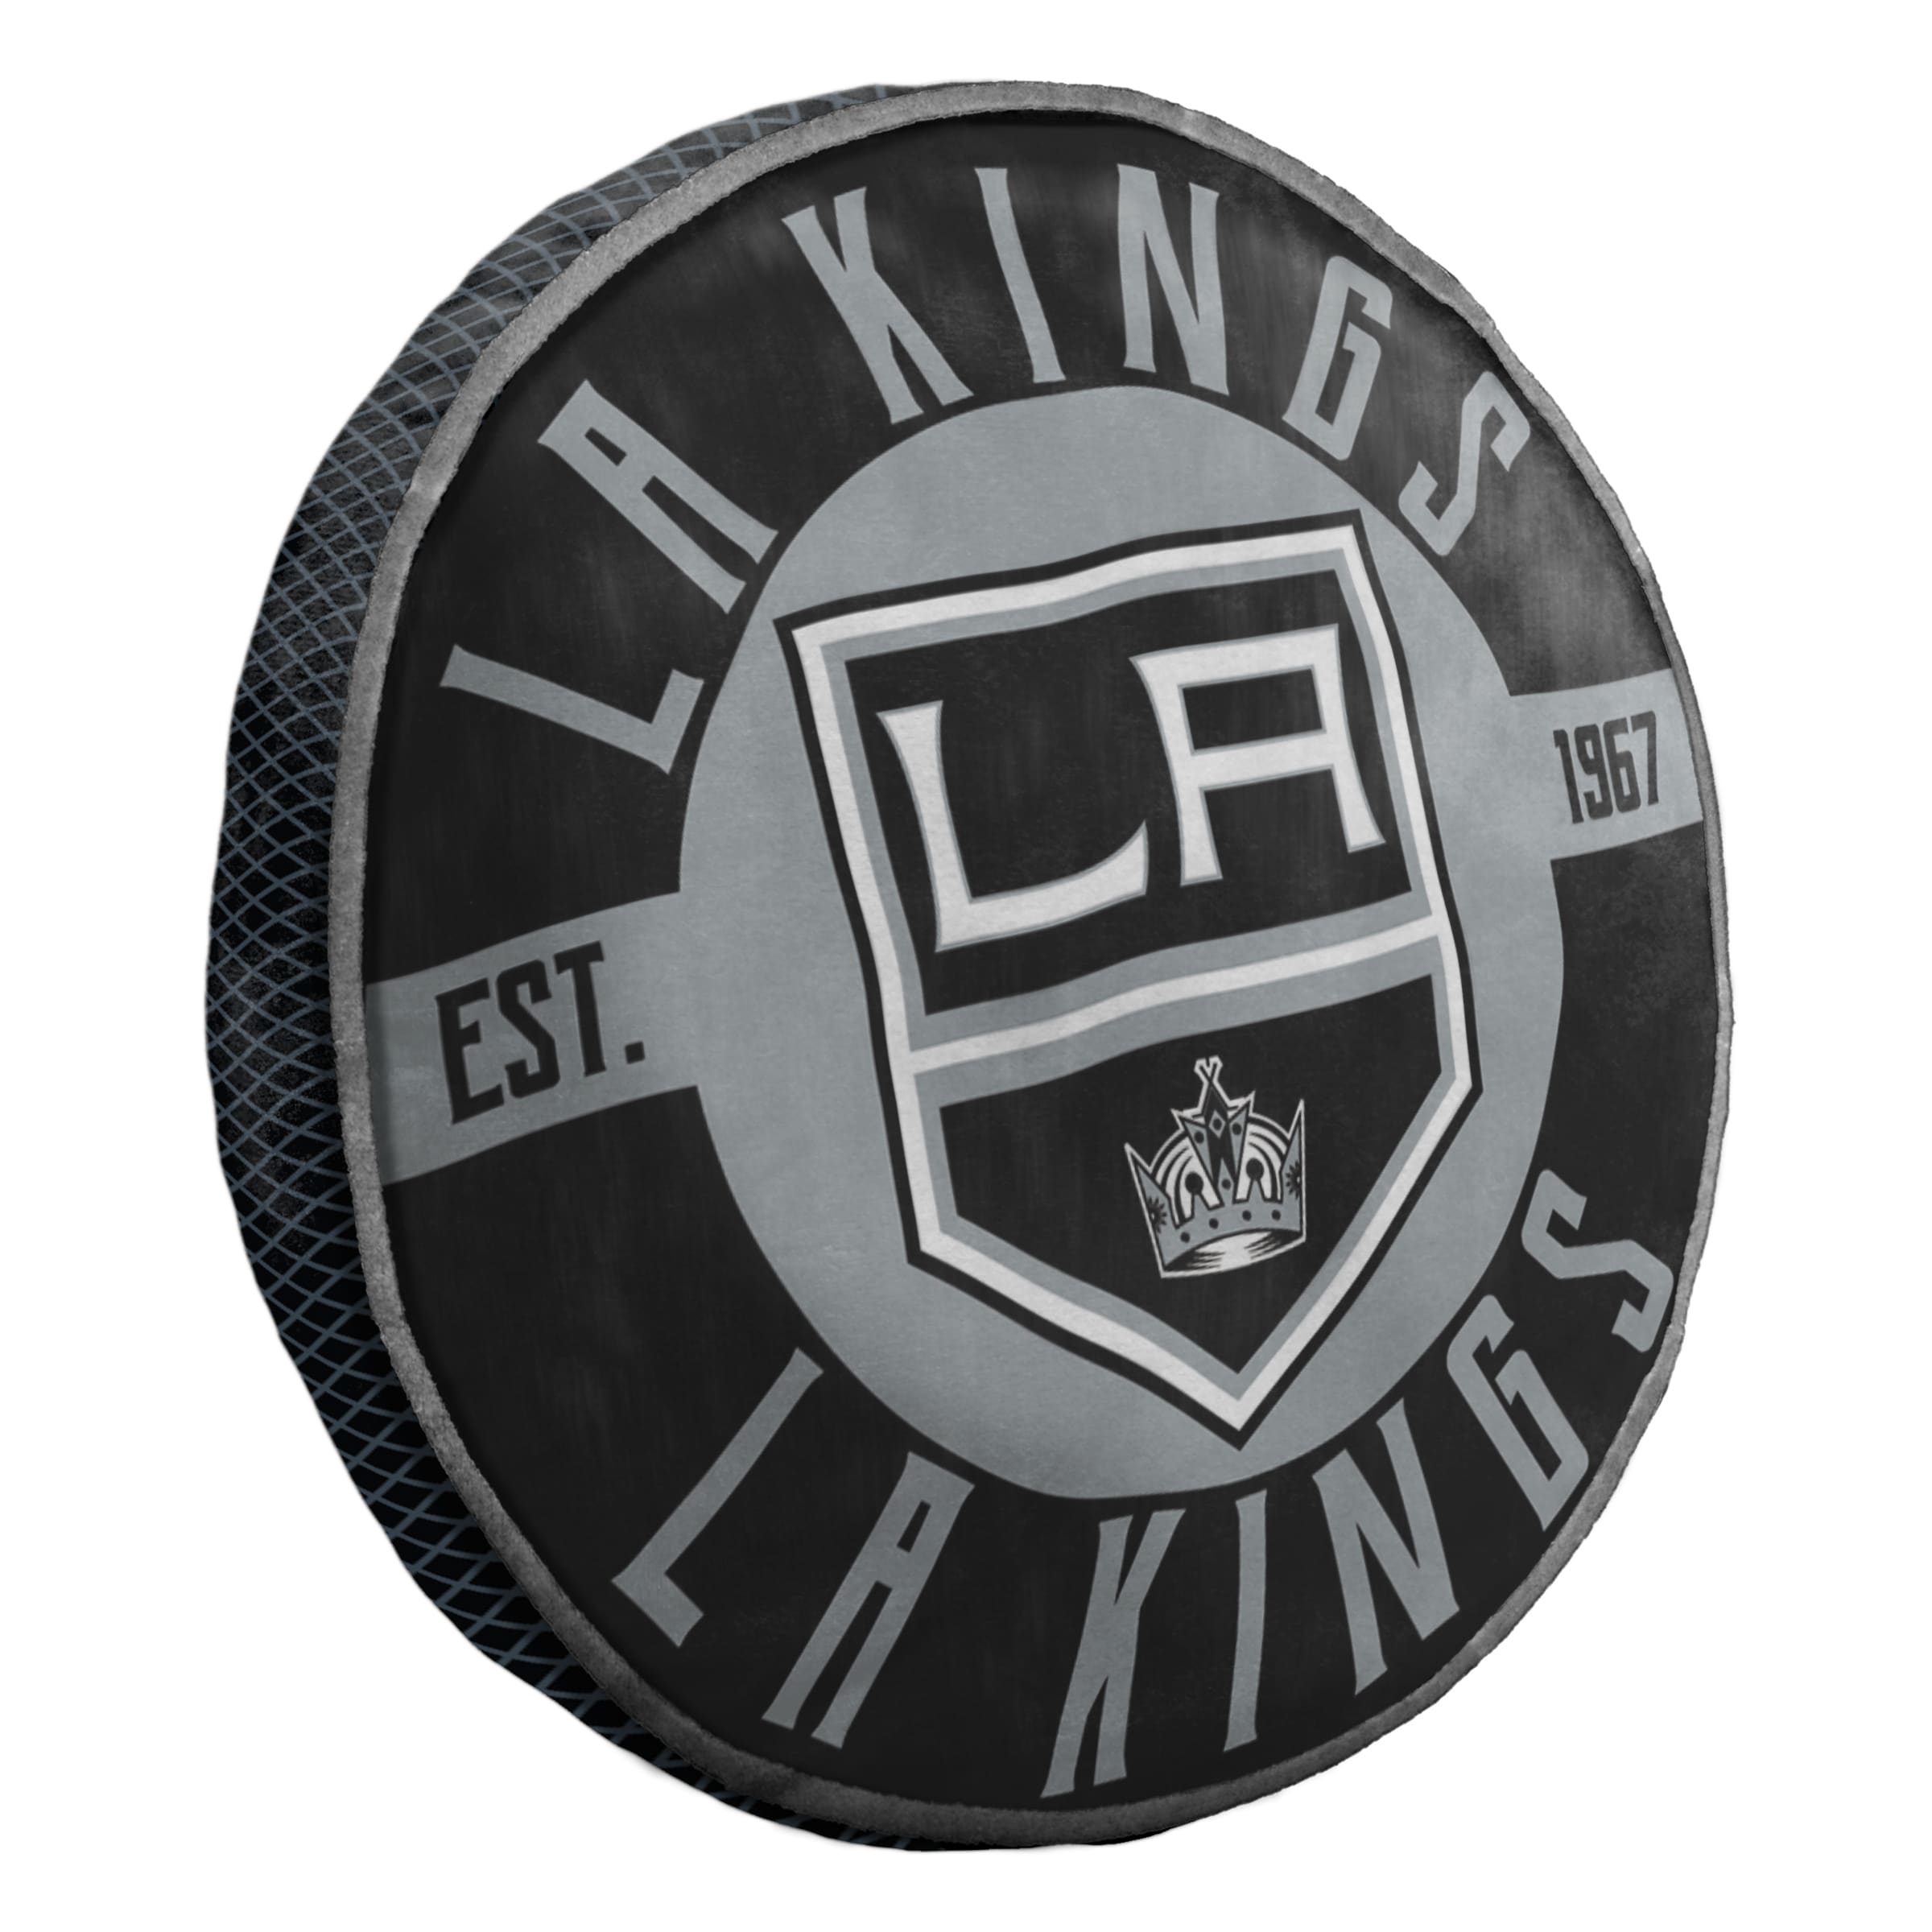 Los Angeles Kings: 2022 Outdoor Logo - Officially Licensed NHL